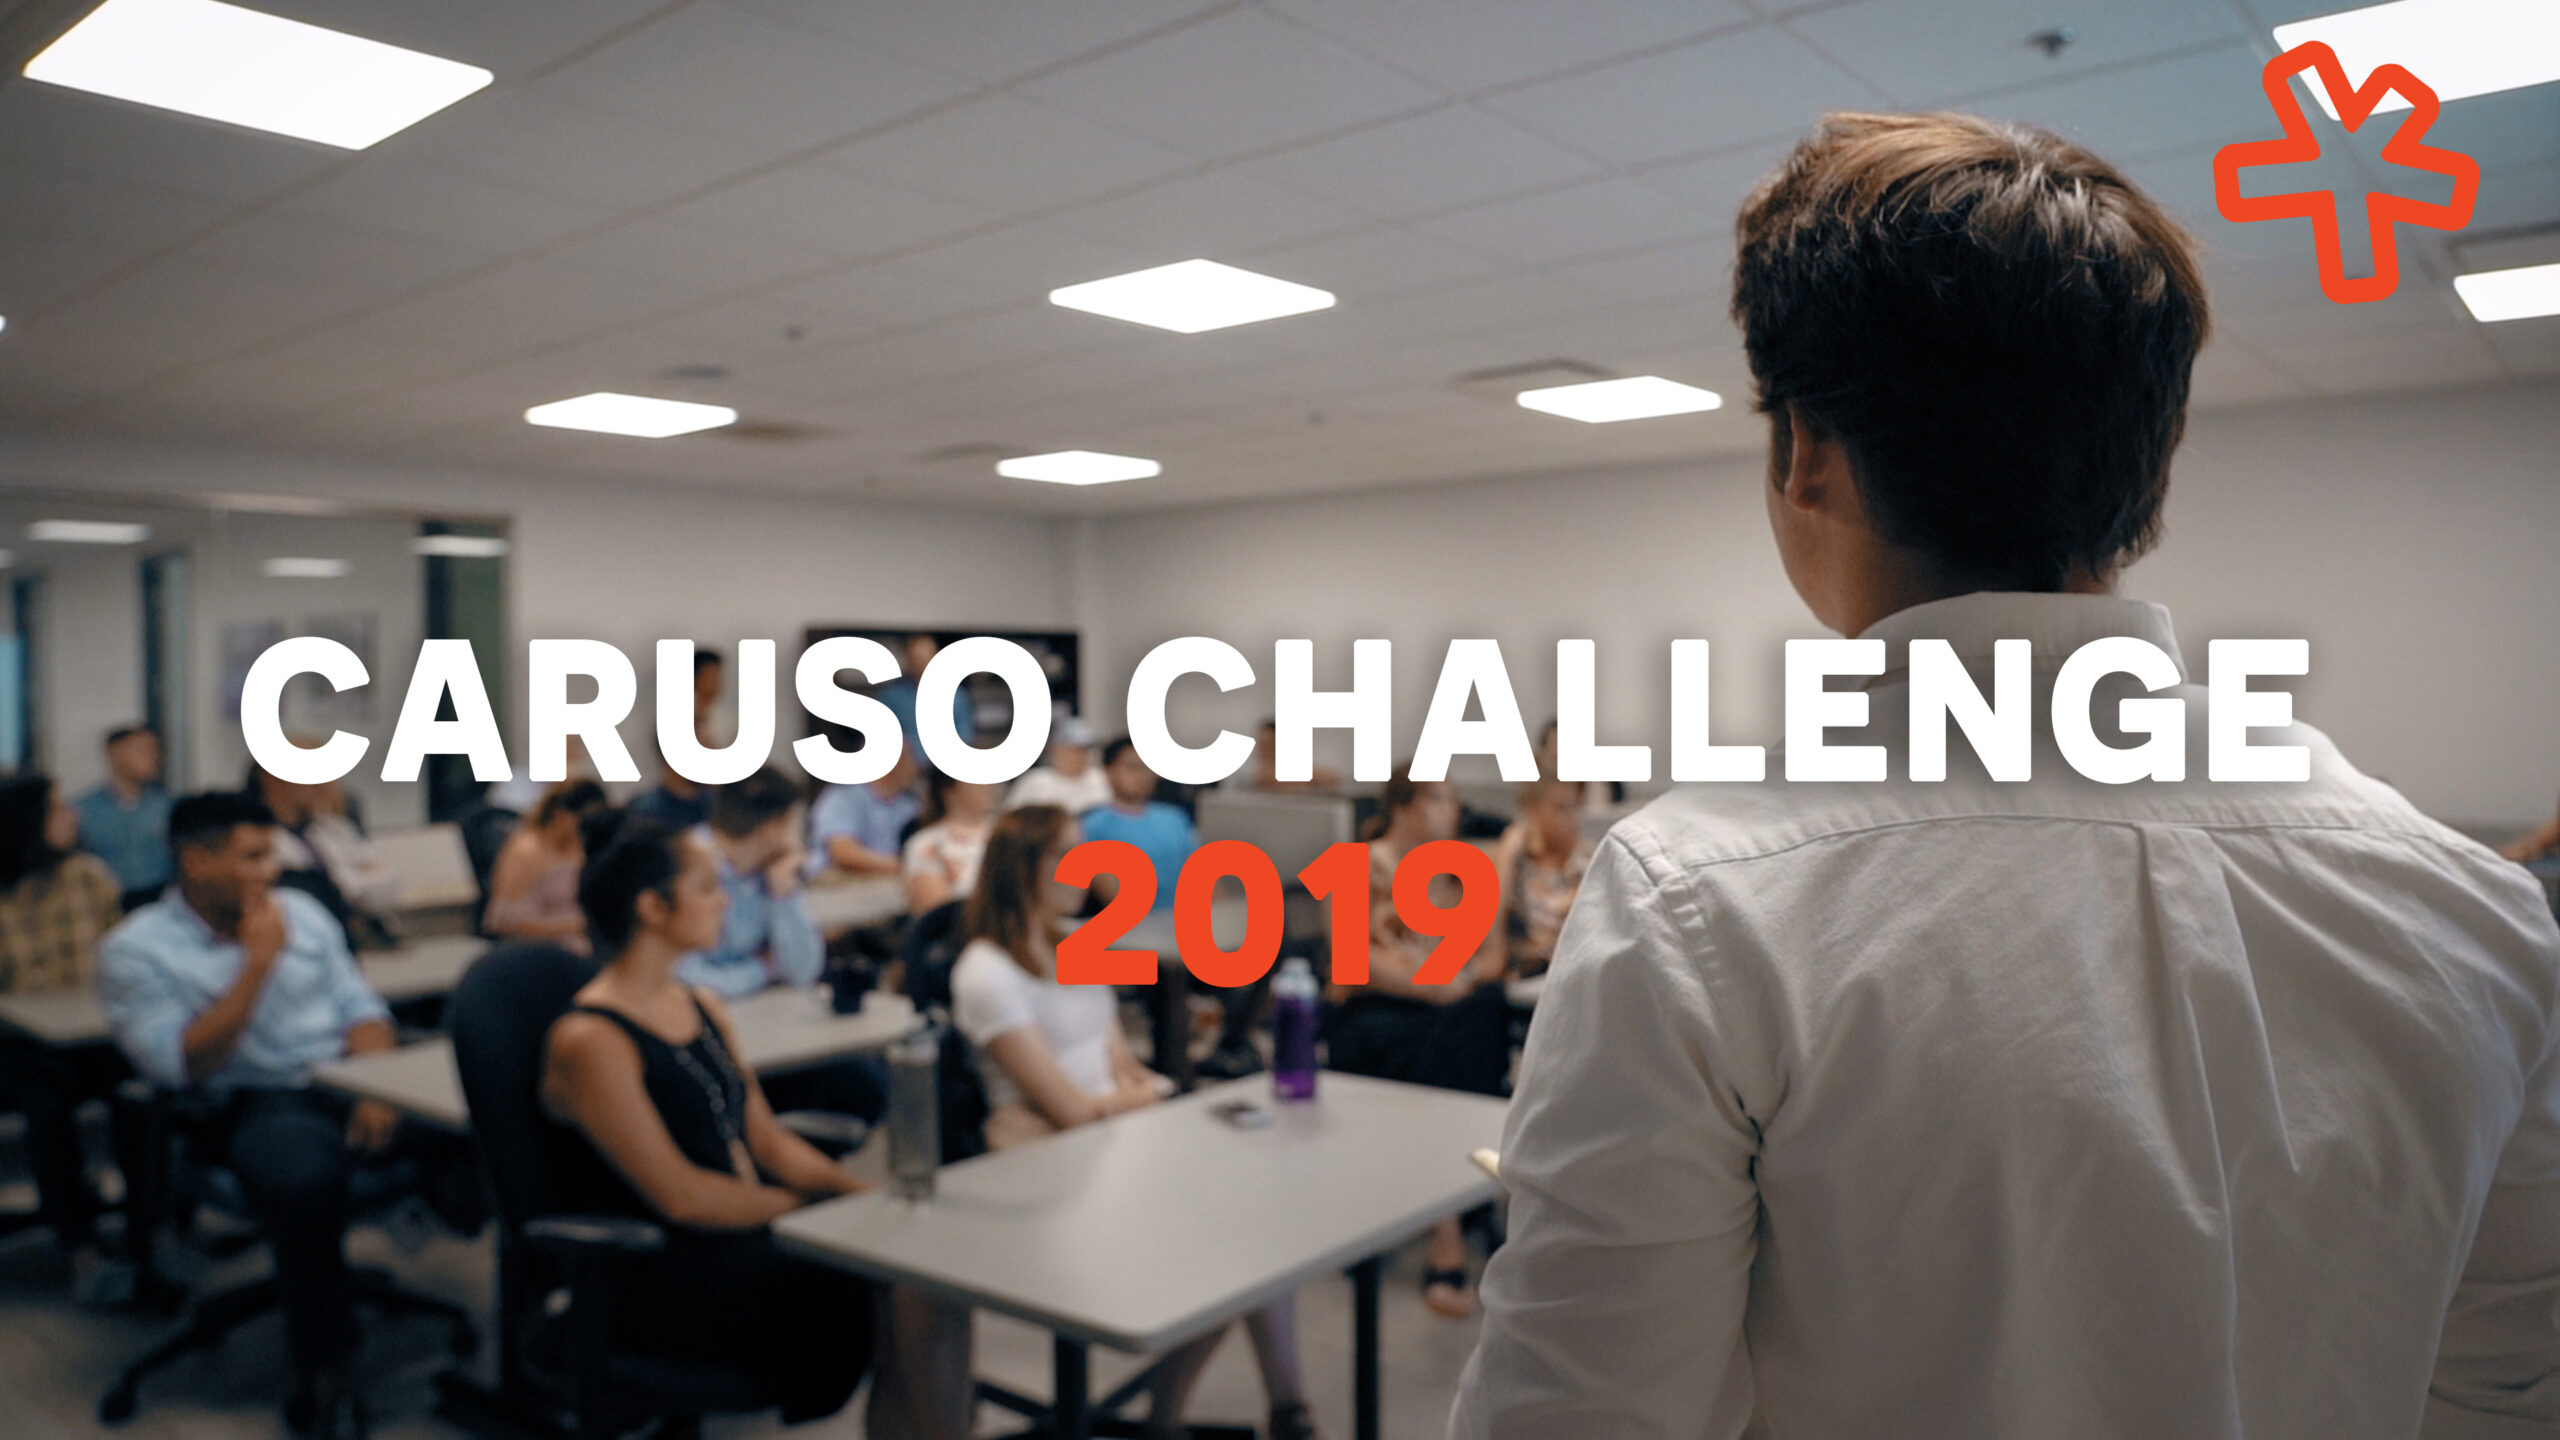 Caruso Challenge Entrepreneurship Course for High School Students